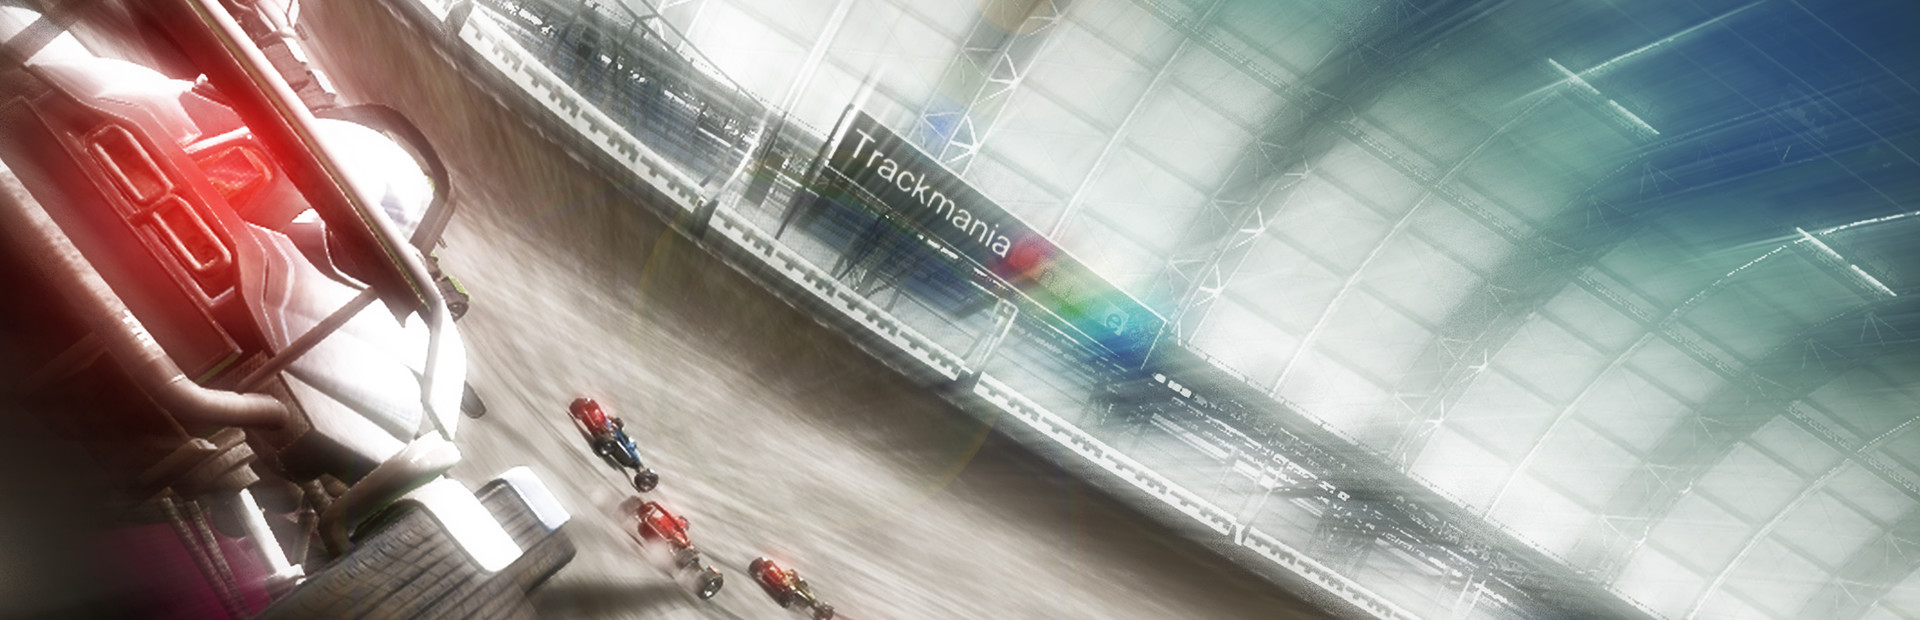 Trackmania United Forever cover image